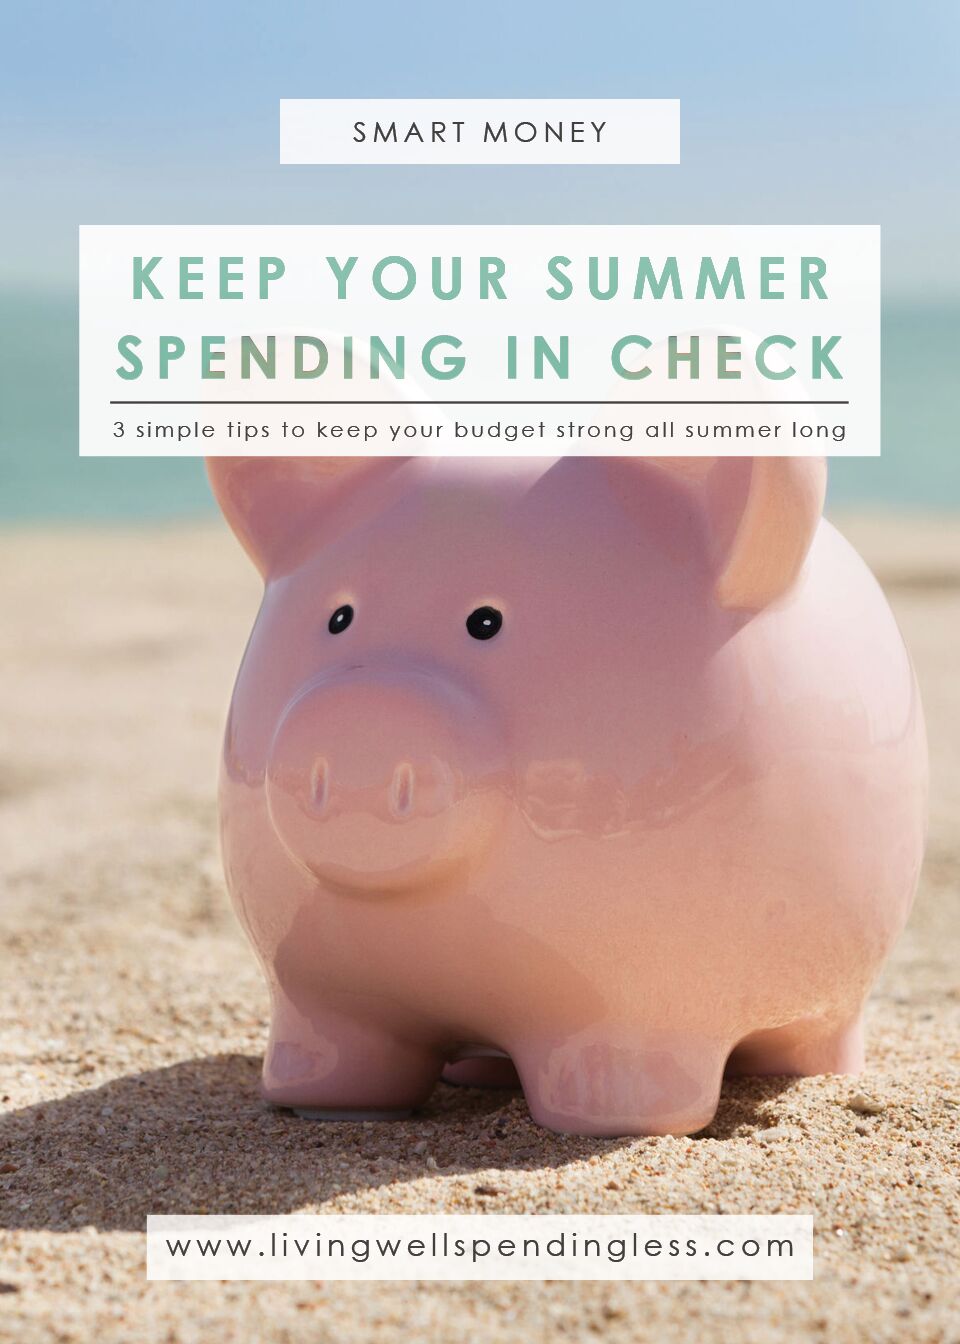 How to Keep Your Summer Spending in Check | Budgeting 101 | Debt Free Living | Home 101 | Money Saving Tips